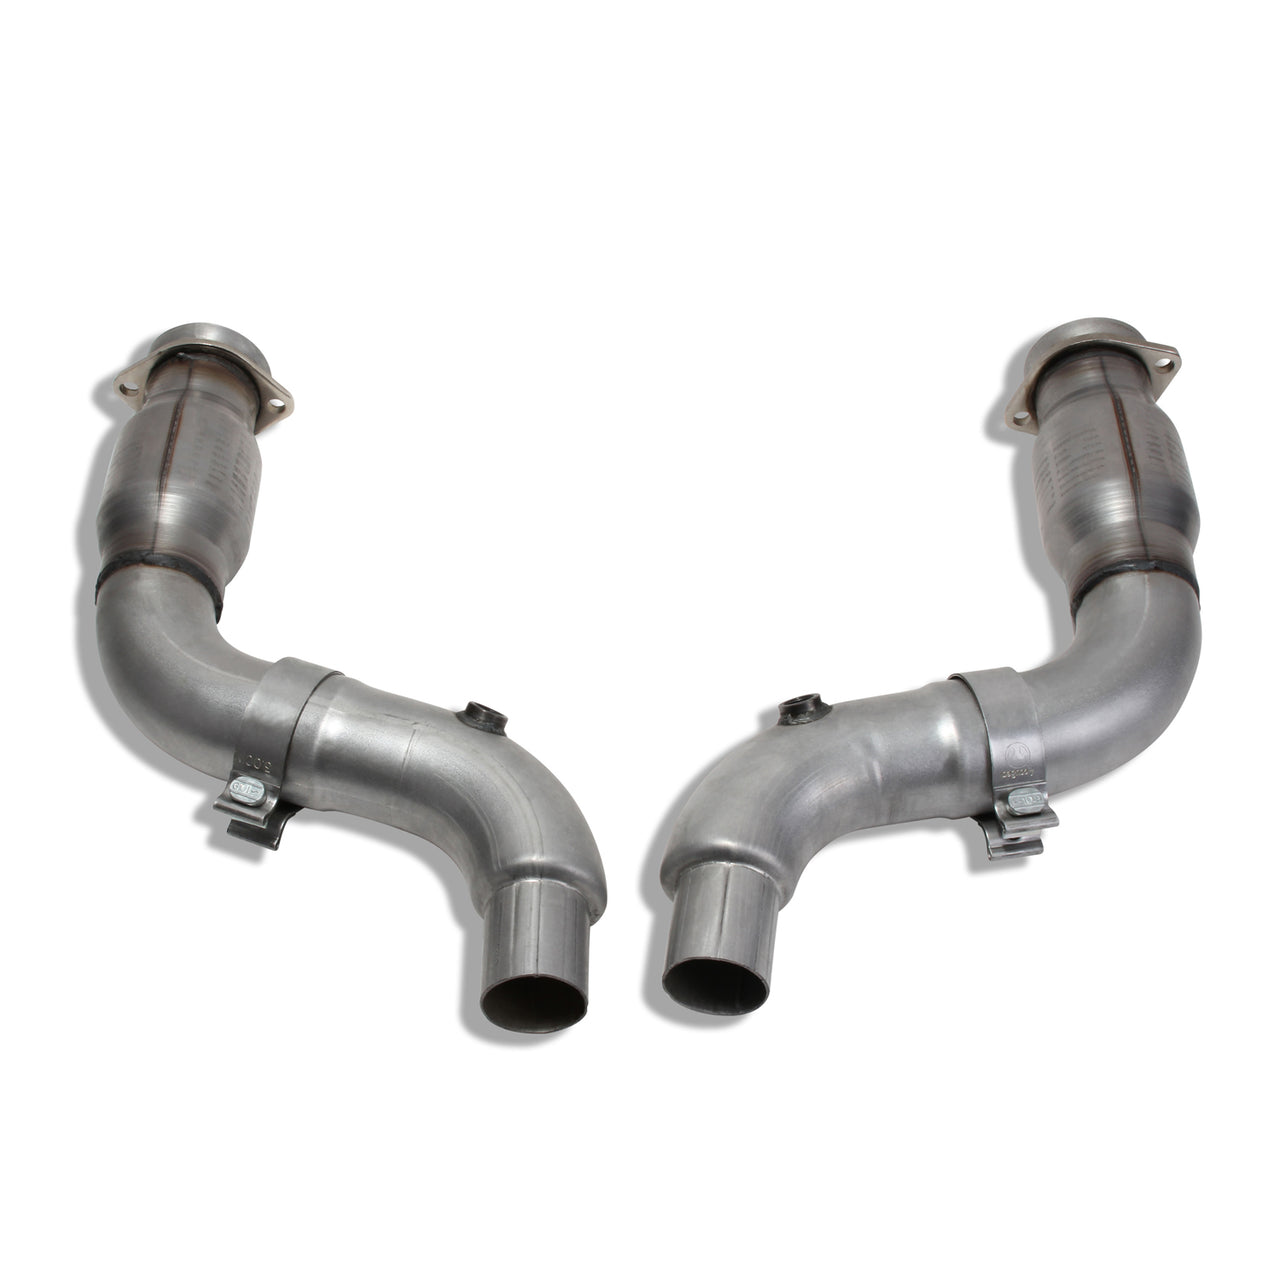 2015-2021 MUSTANG GT 3" SHORT MID PIPE W/ CONVERTERS FOR 1633/0 1856/0 HEADERS